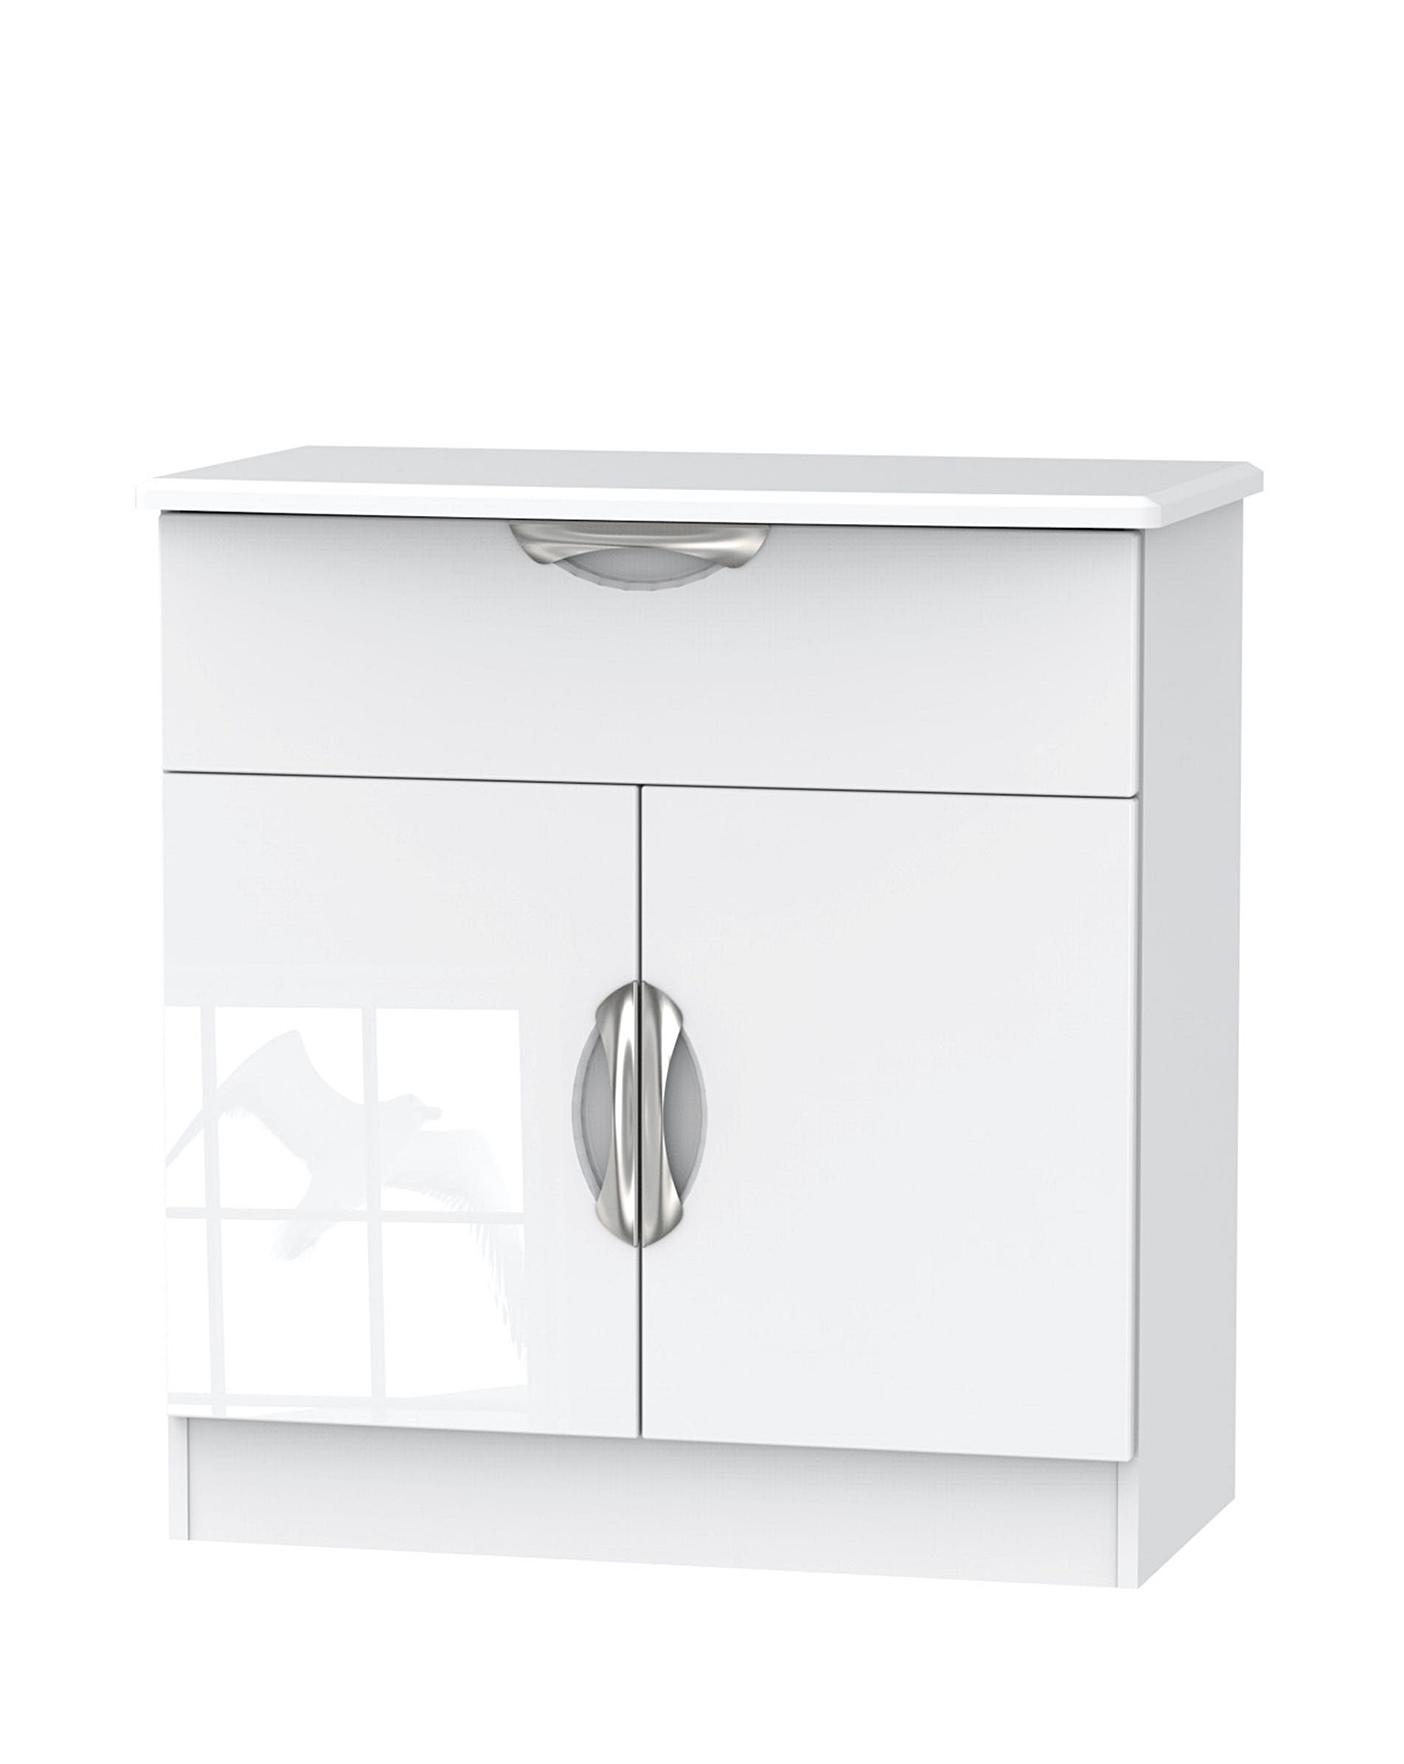 milano-ready-assembled-small-sideboard-j-d-williams